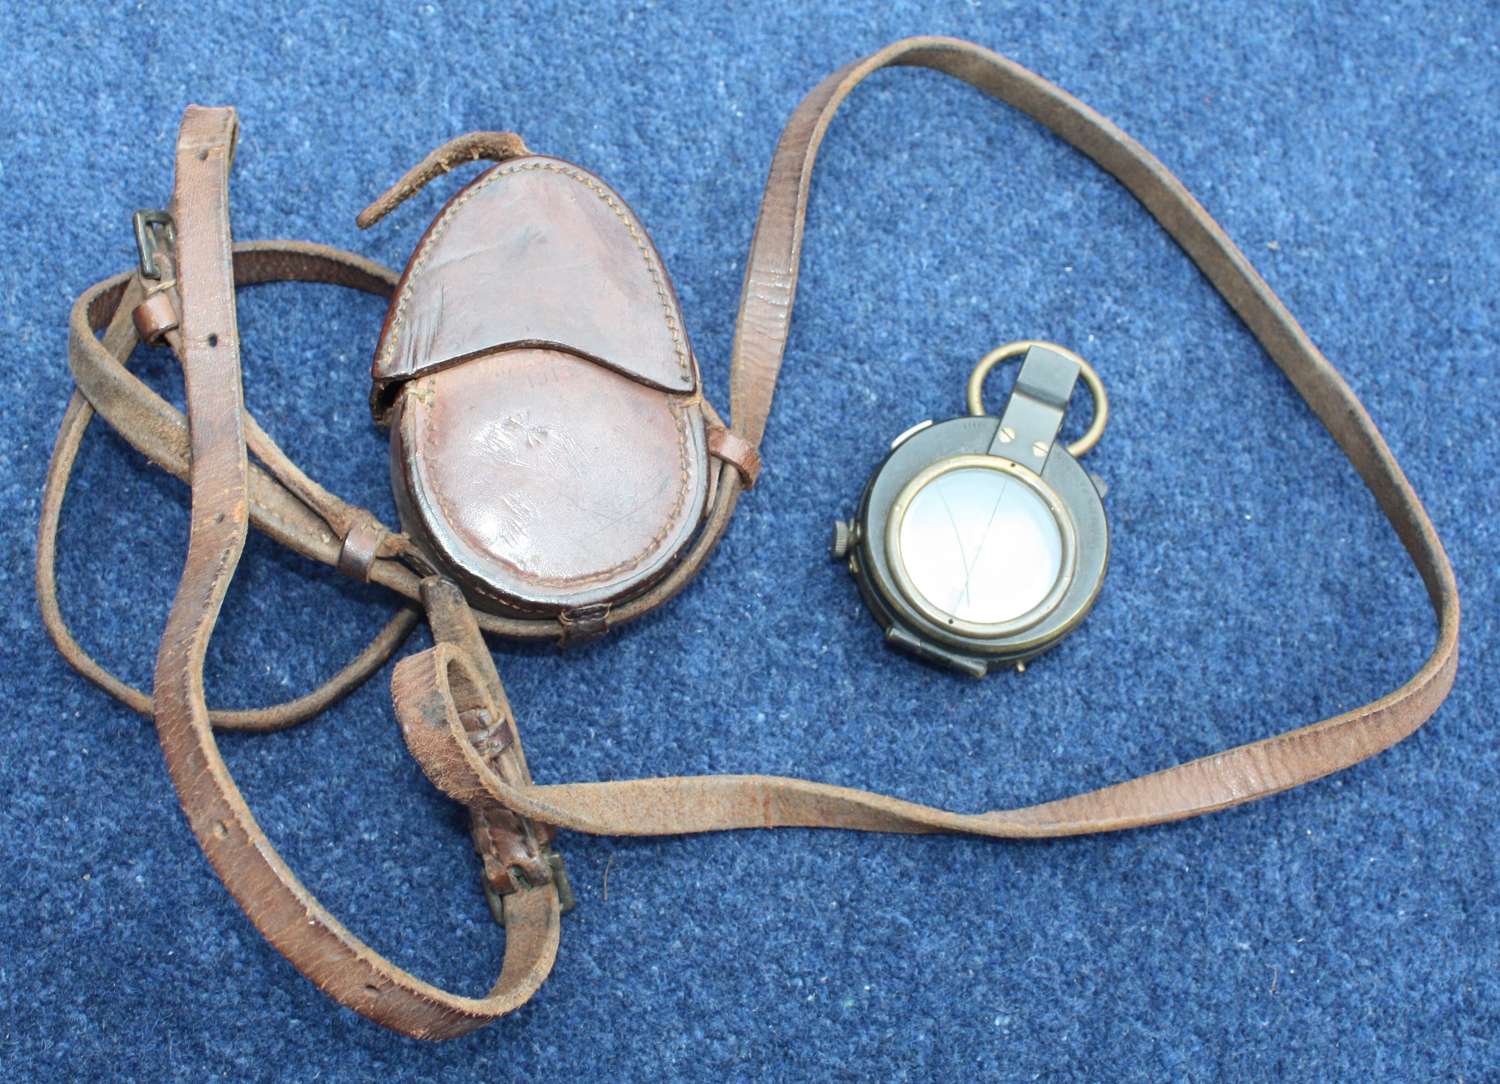 1918 DATED BRITISH OFFICER'S LEATHER COMPASS & 1918 DATED CASE